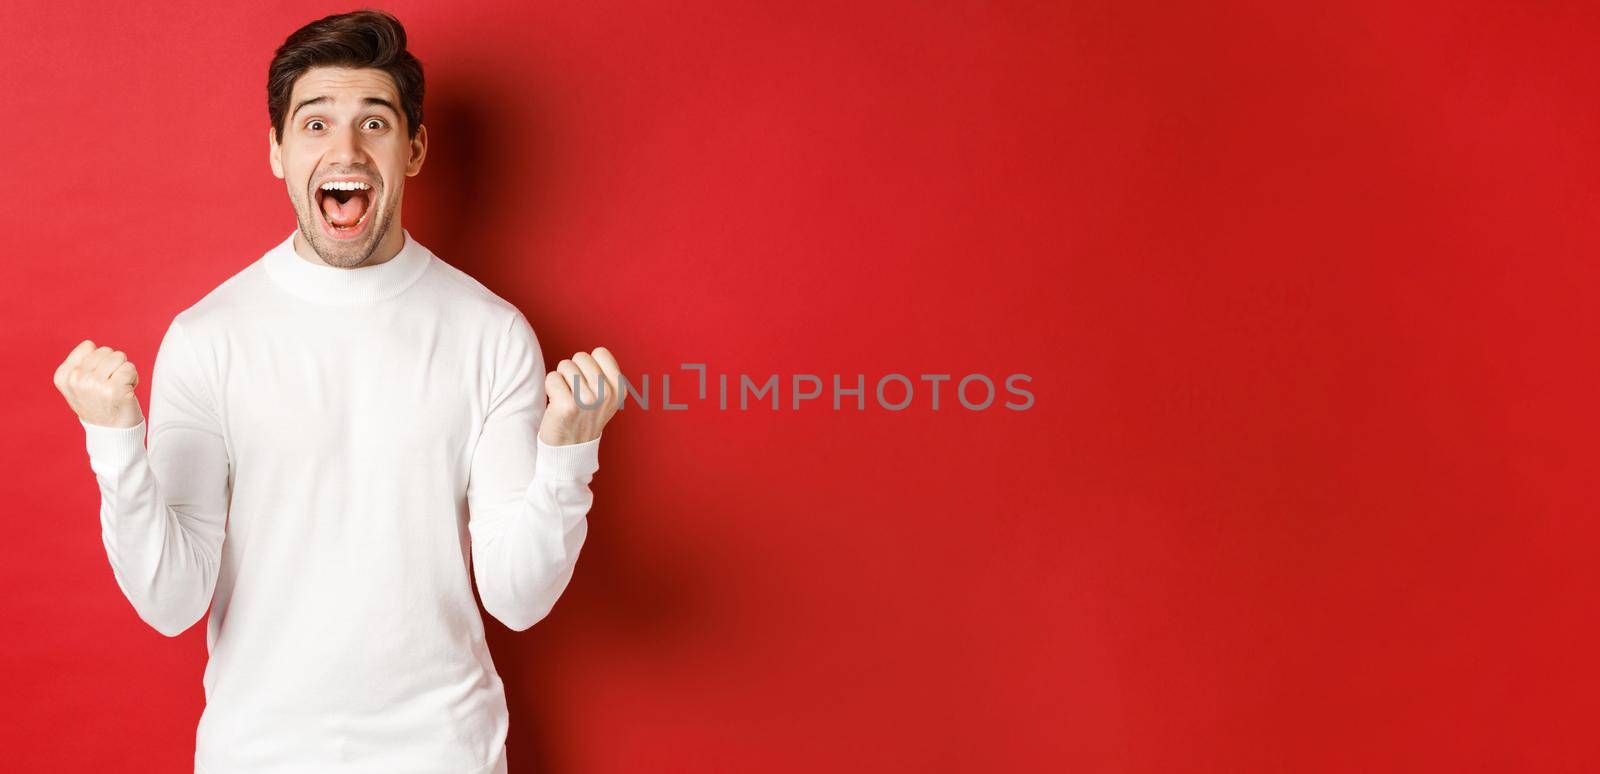 Image of happy good-looking man in white sweater, winning something, making fist pump and smiling amazed, celebrating victory, standing over red background.